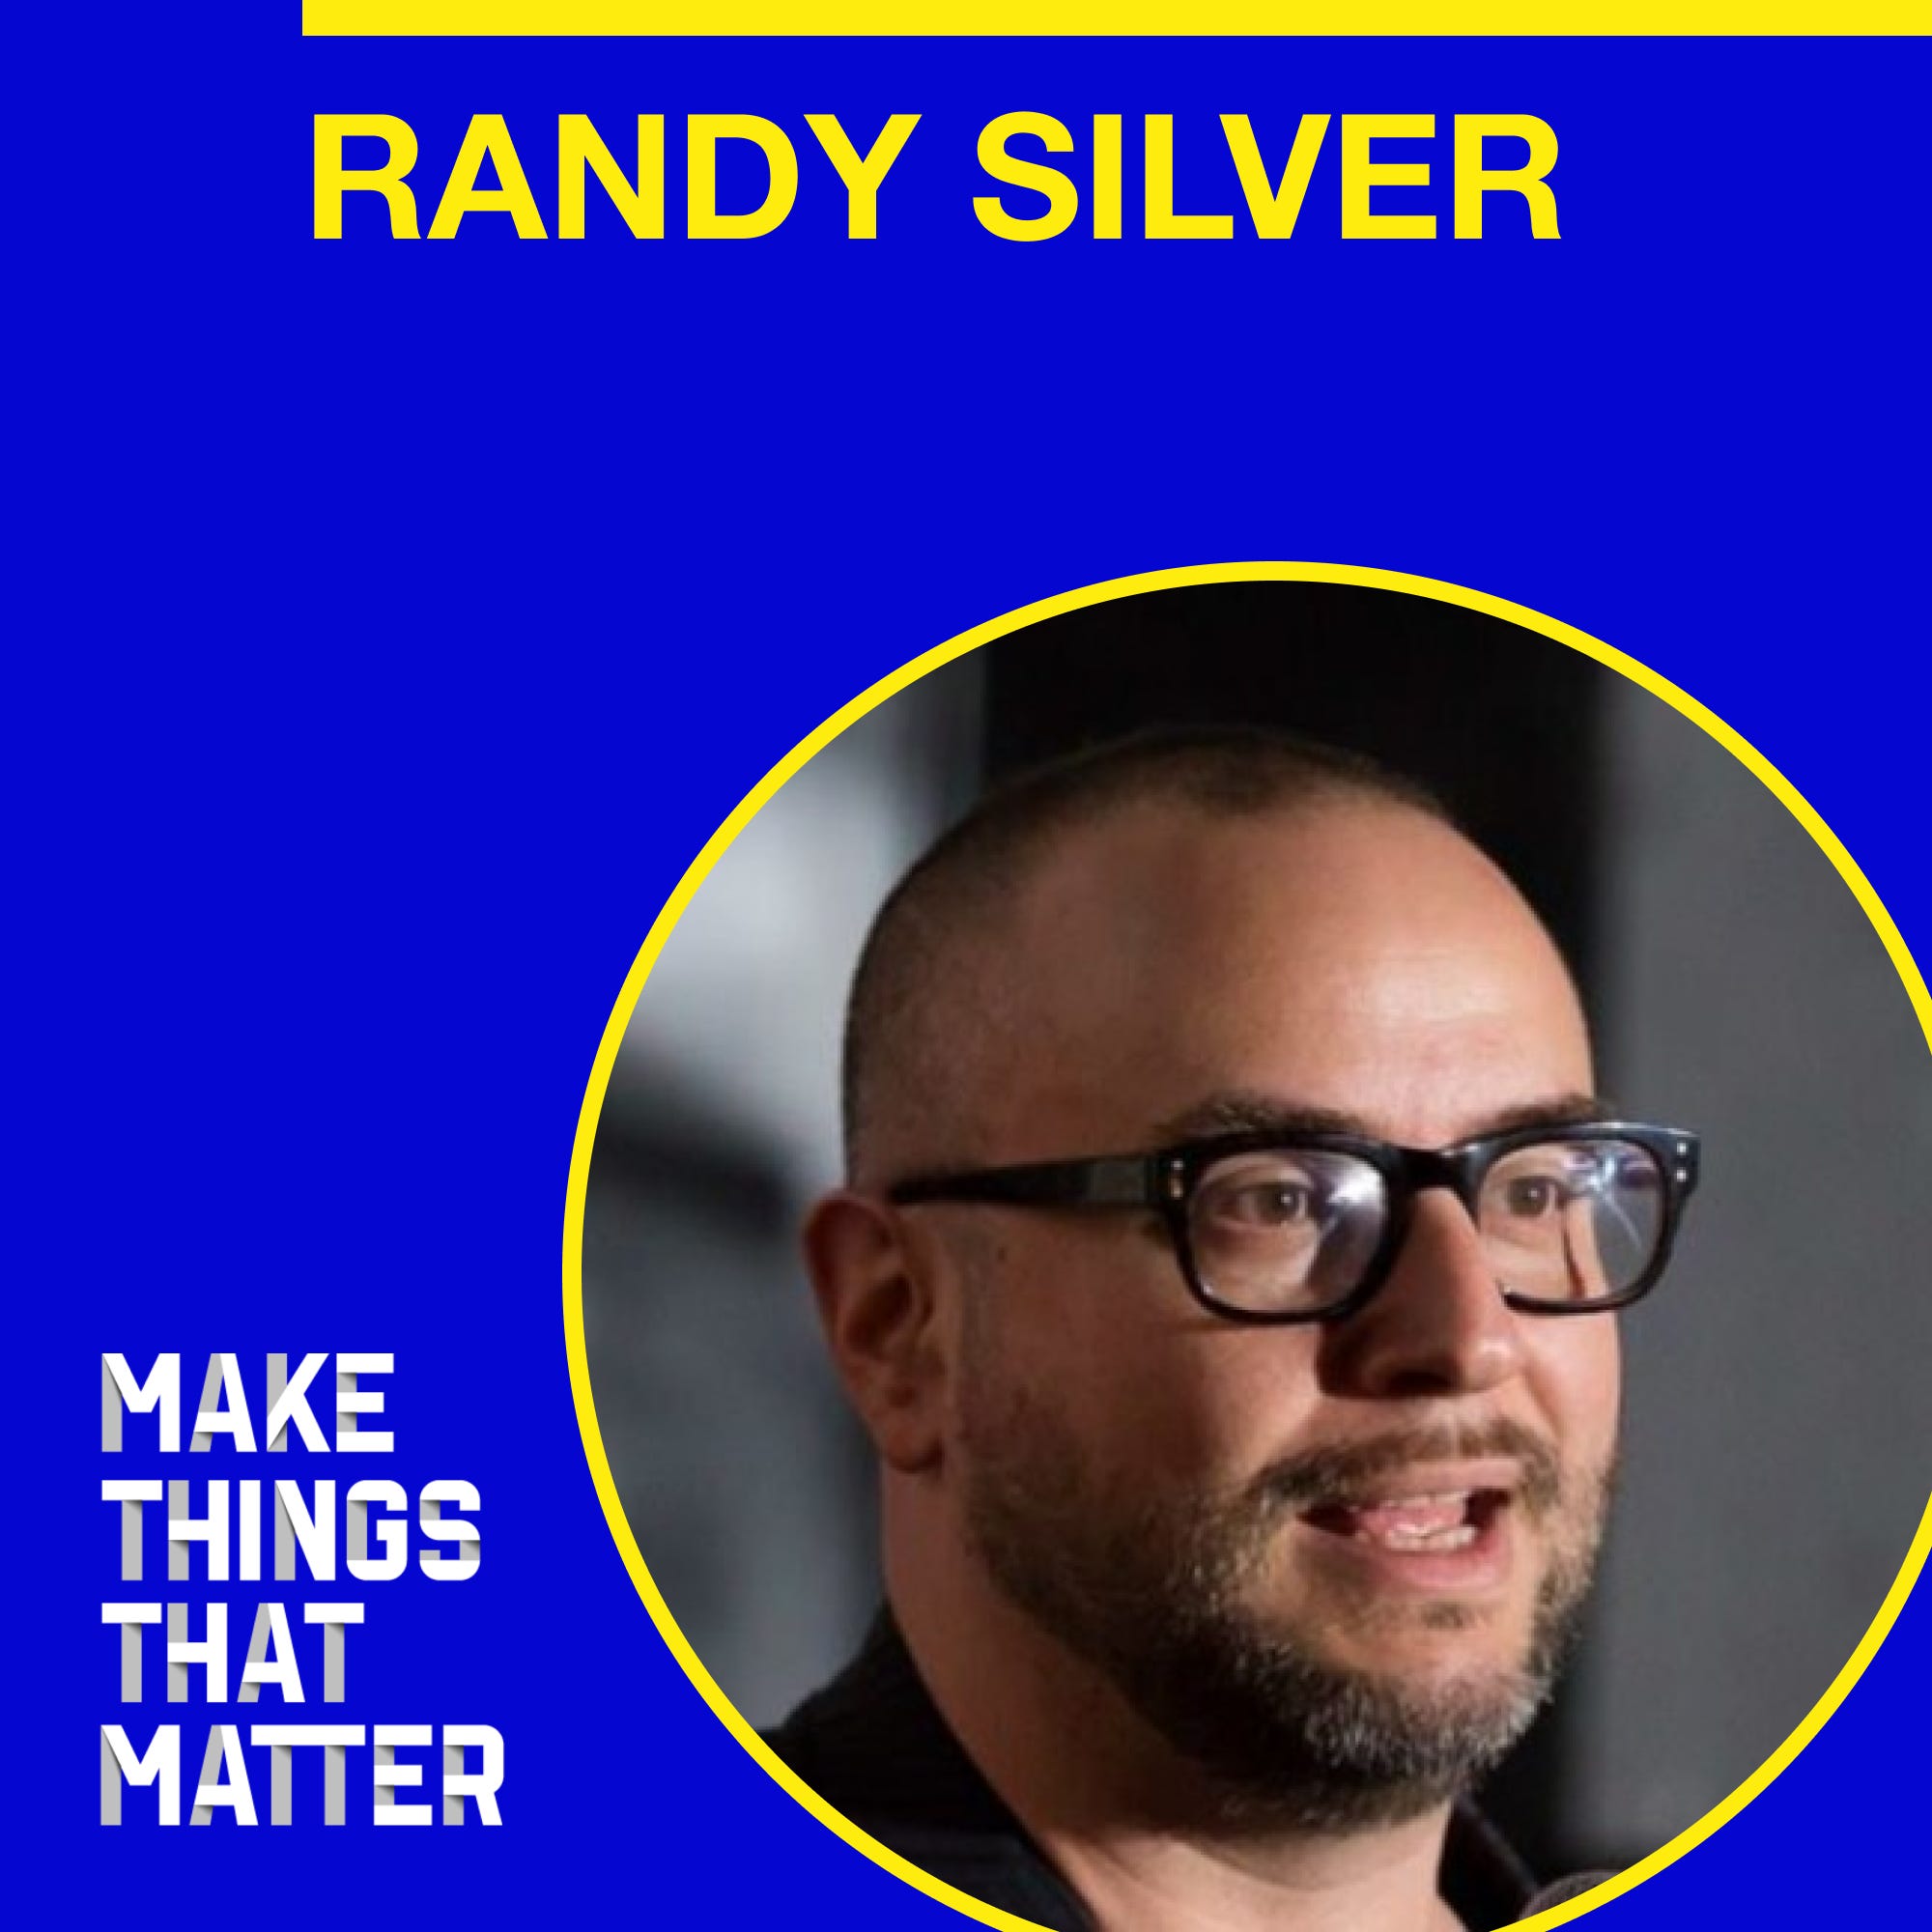 Randy Silver: The conversations that create impactful products